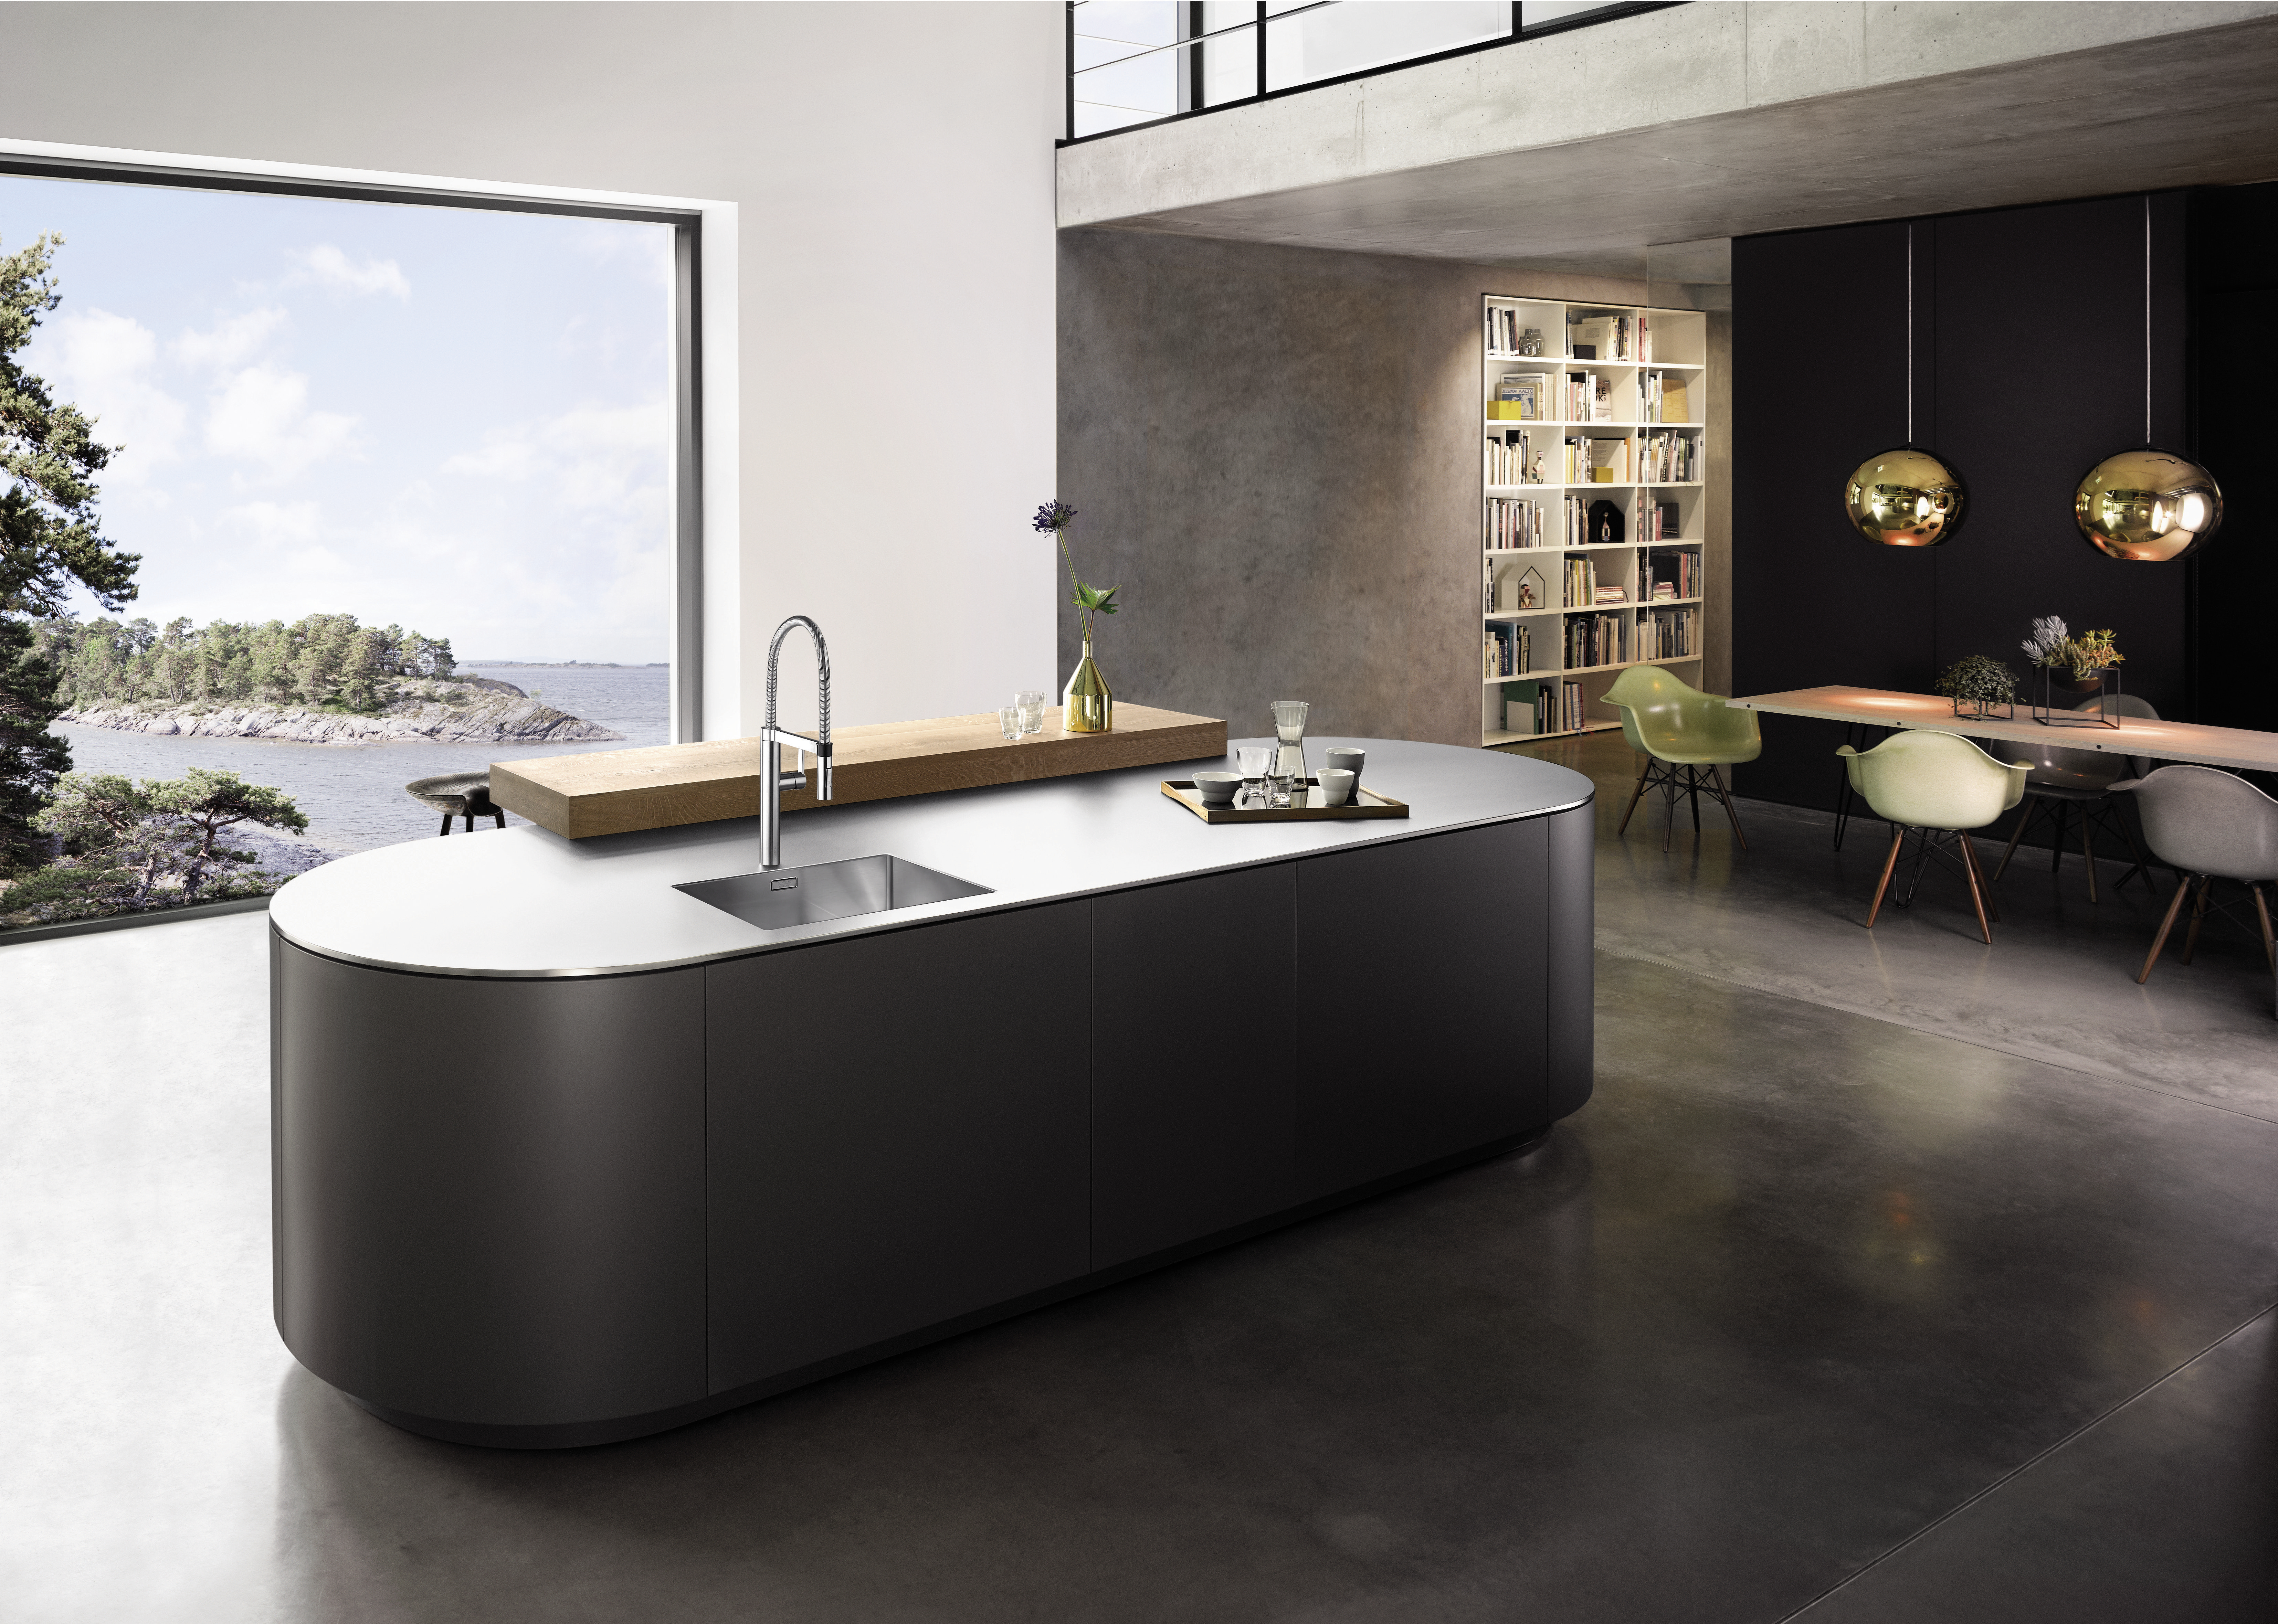 An elegant stainless steel worktop with integrated sink